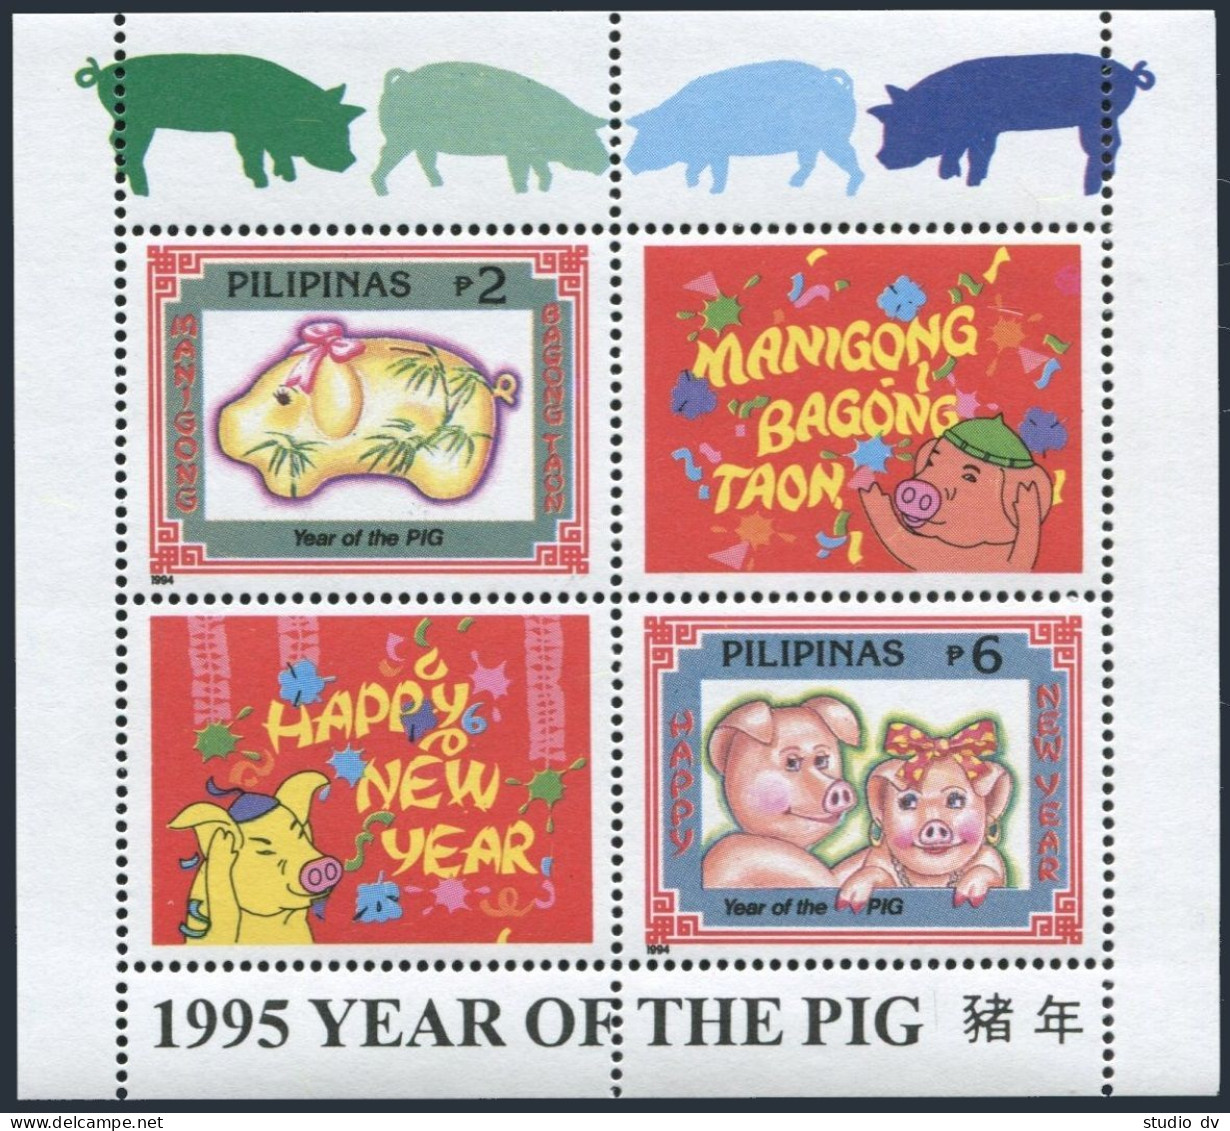 Philippines 2338a, 2338a Imperf, MNH. New Year 1995 - Lunar Year Of The Boar. - Philippinen